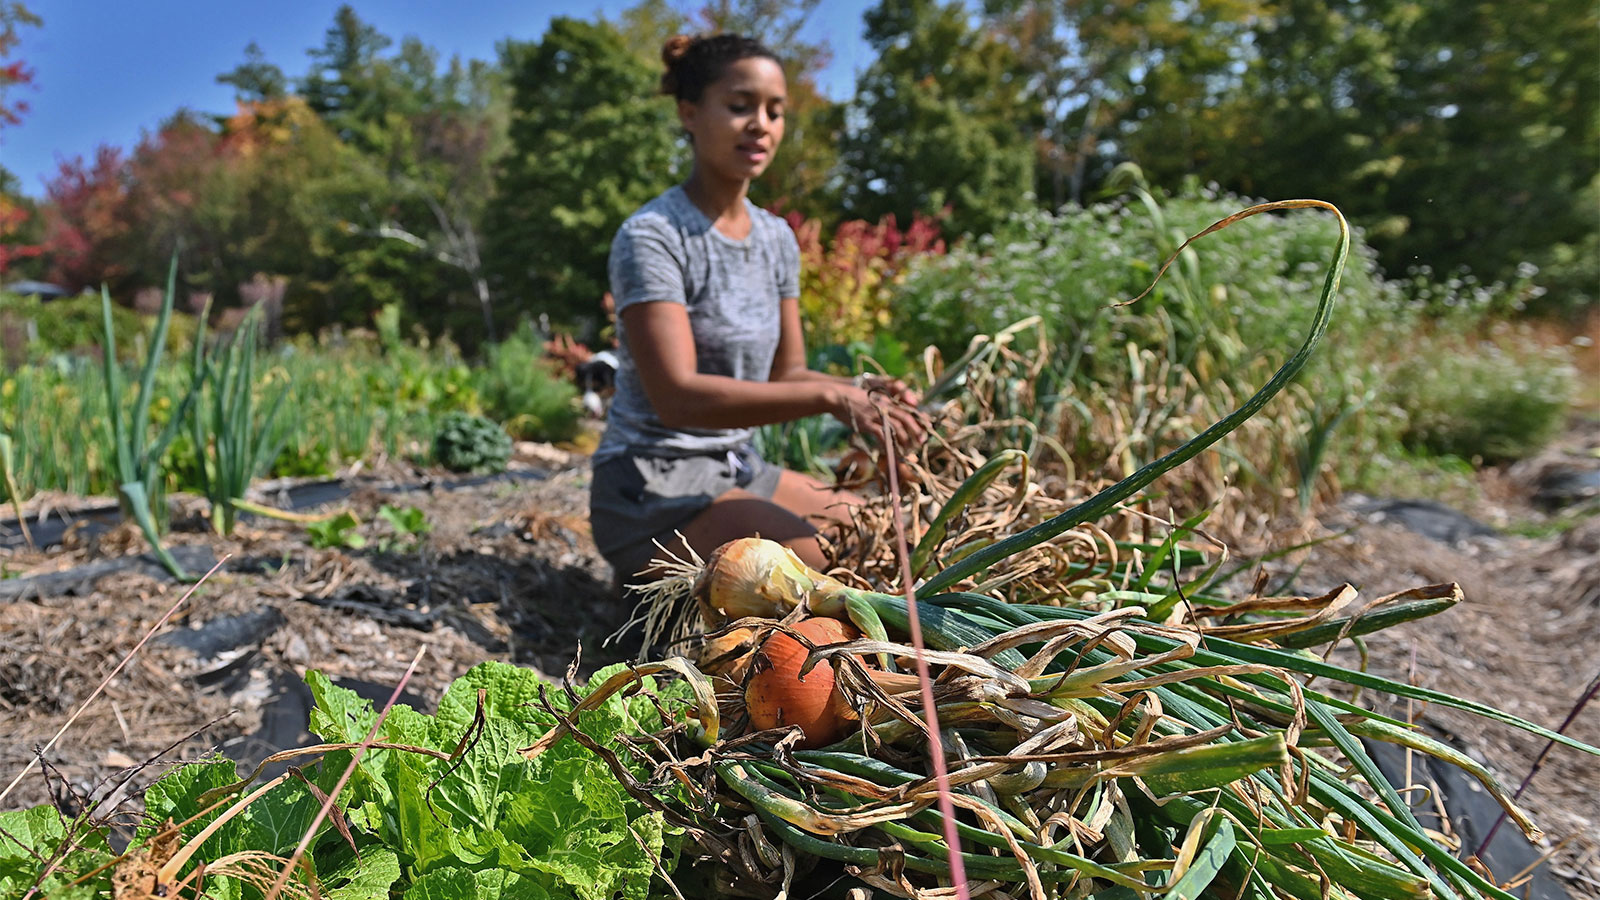 A young Black woman harvesting onions on a farm